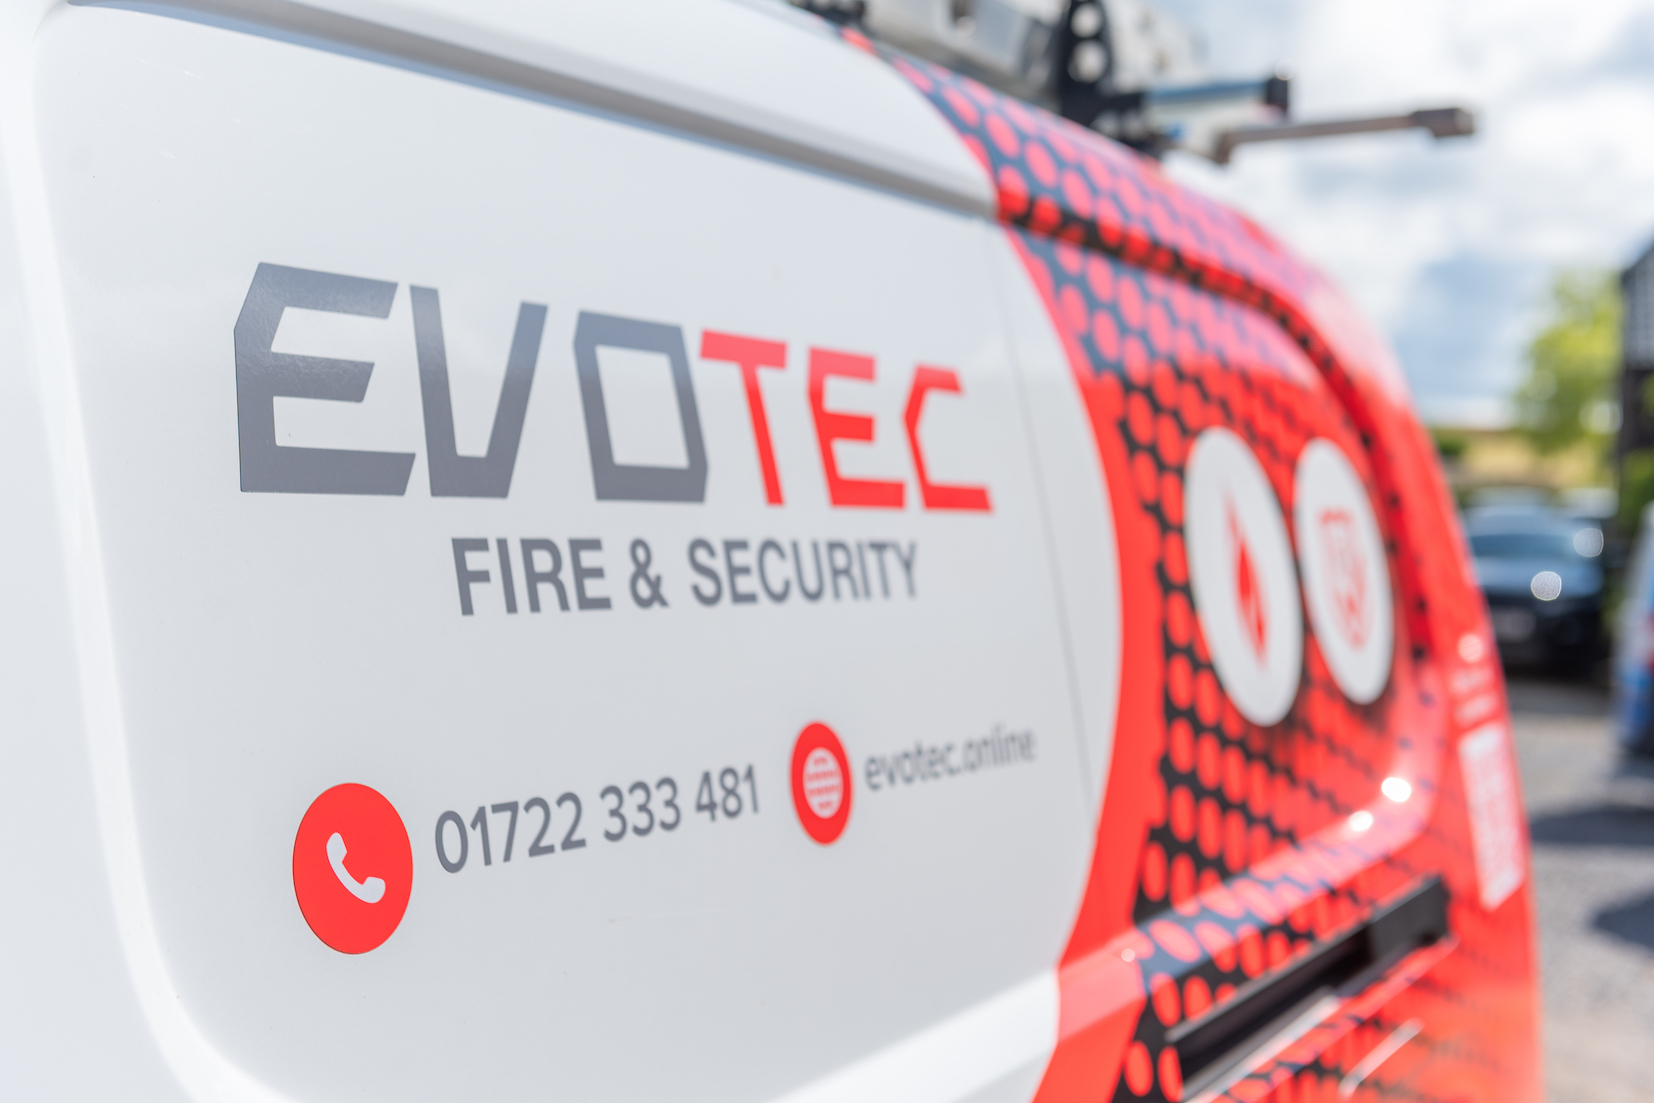 Main image for EVOTEC Fire & Security